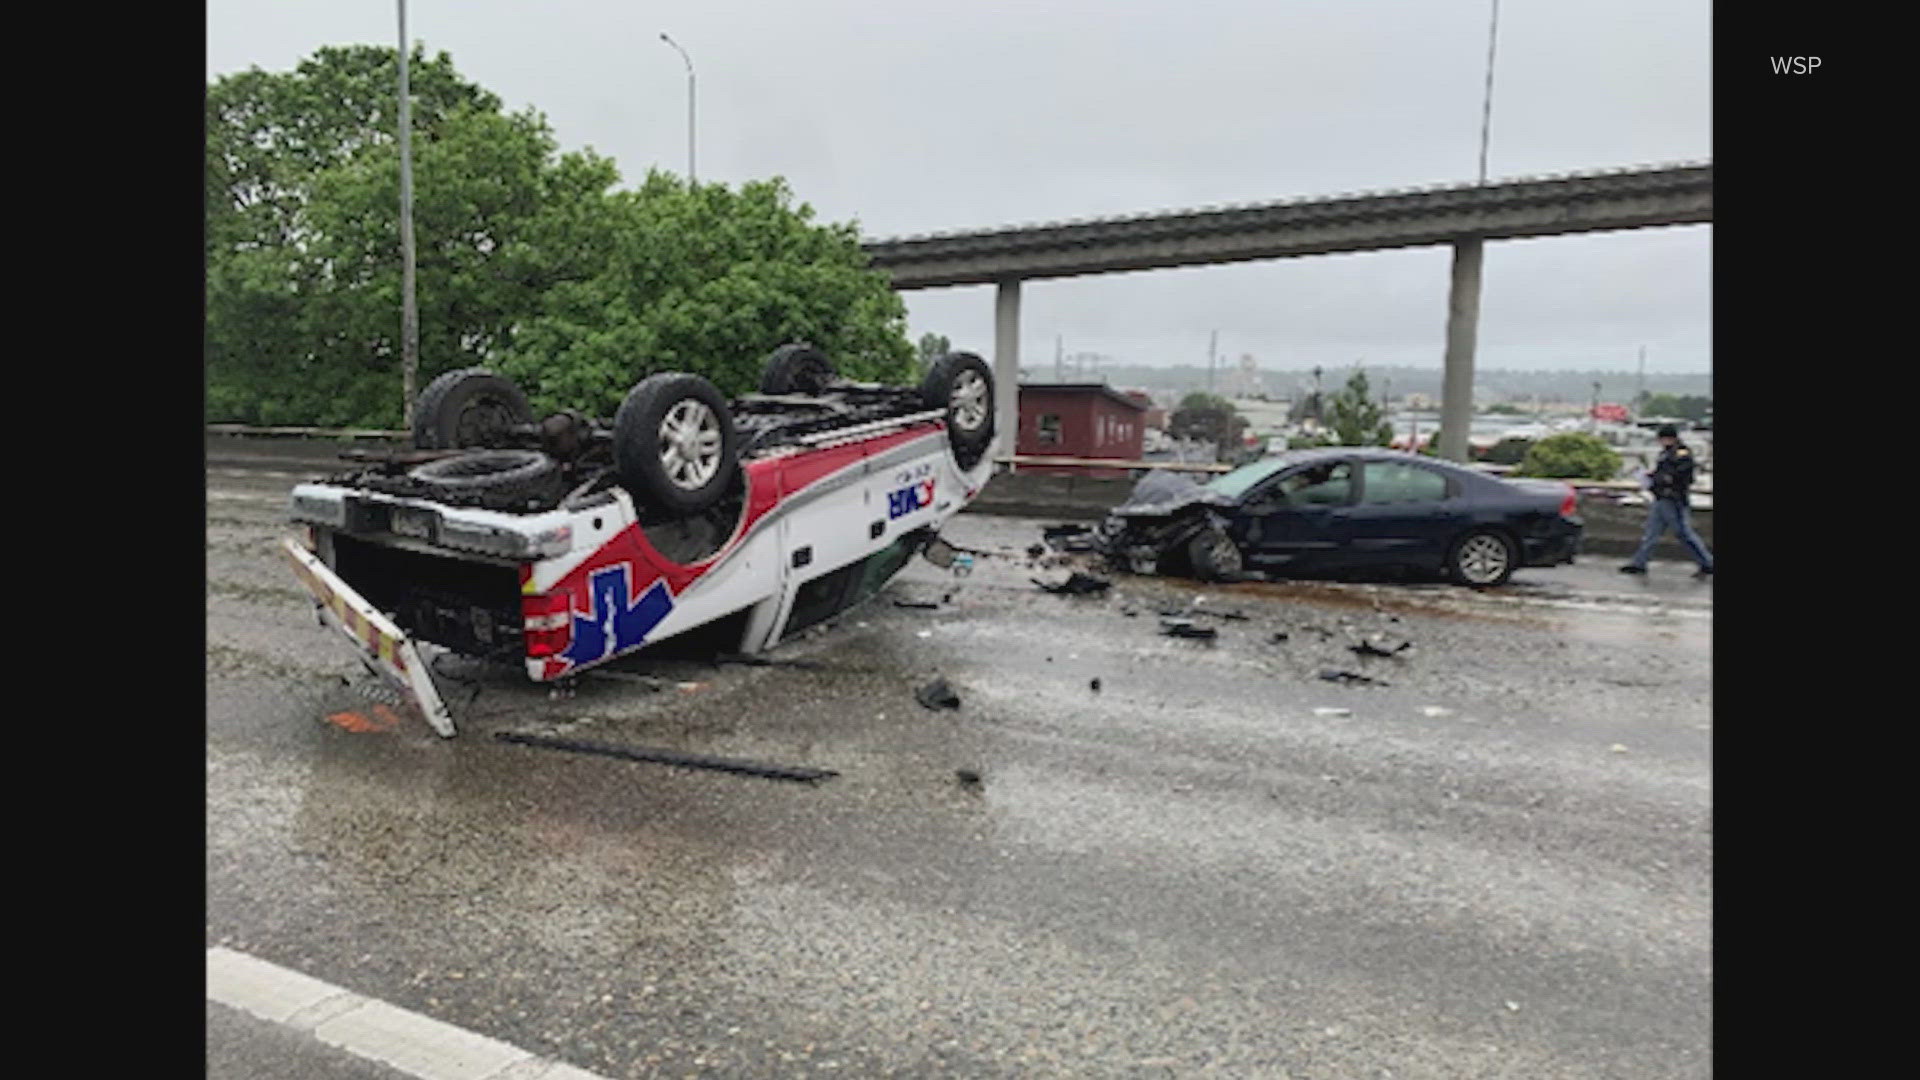 WSP learned during the initial investigation that the driver of one of the vehicles involved had left the scene before law enforcement arrived.